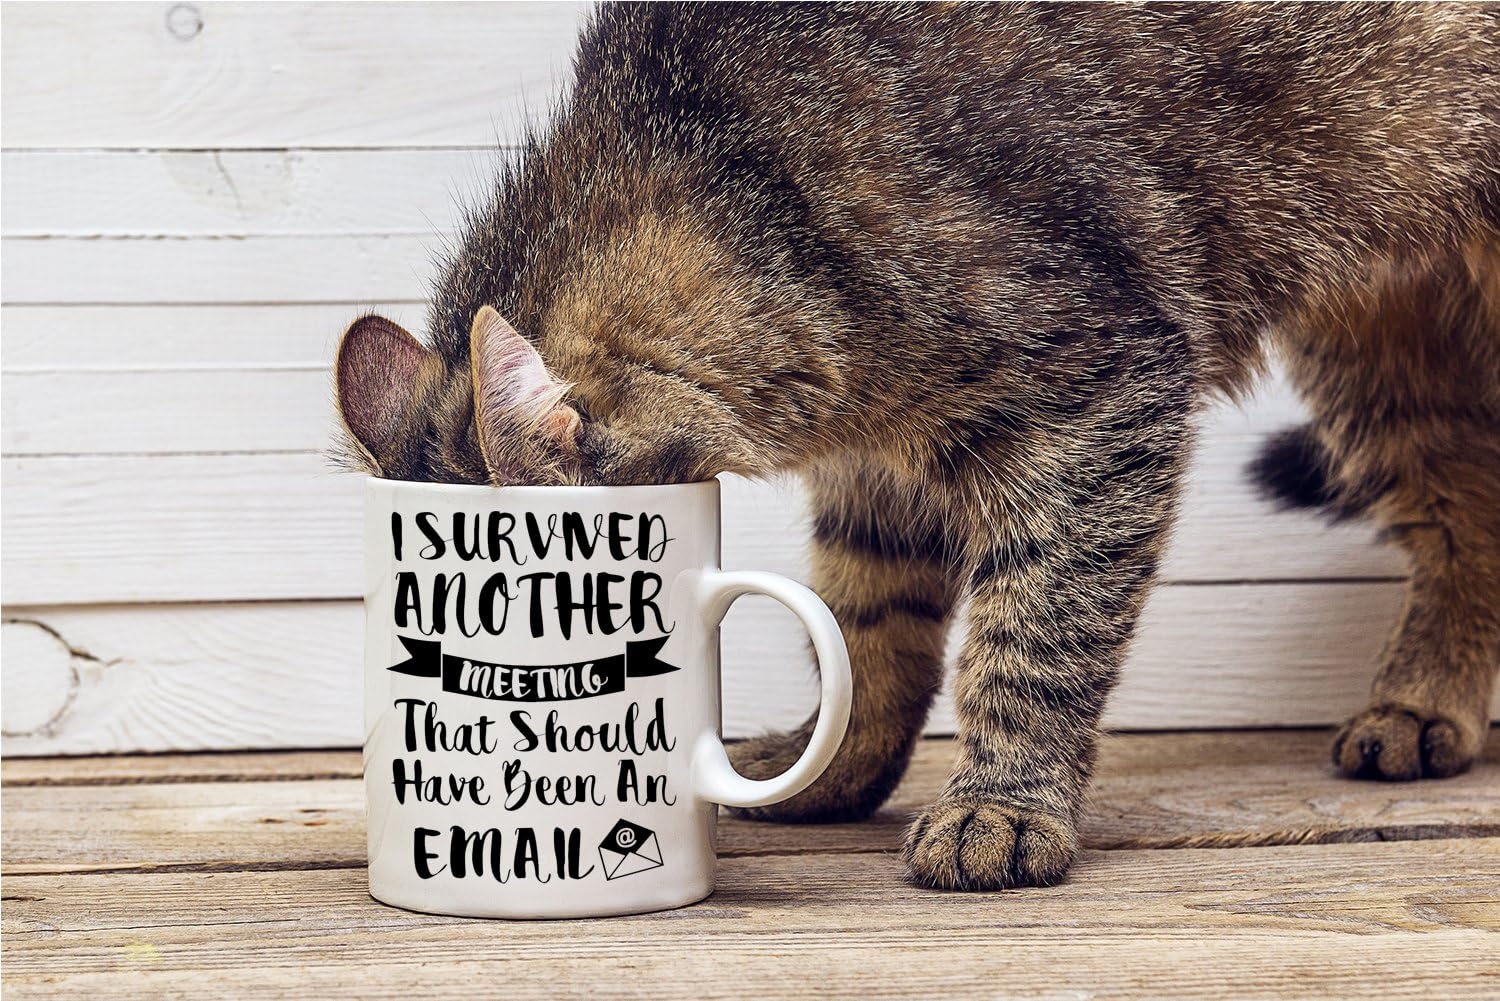 "I Survived Another Meeting That Should Have Been an Email" Coffee Mug